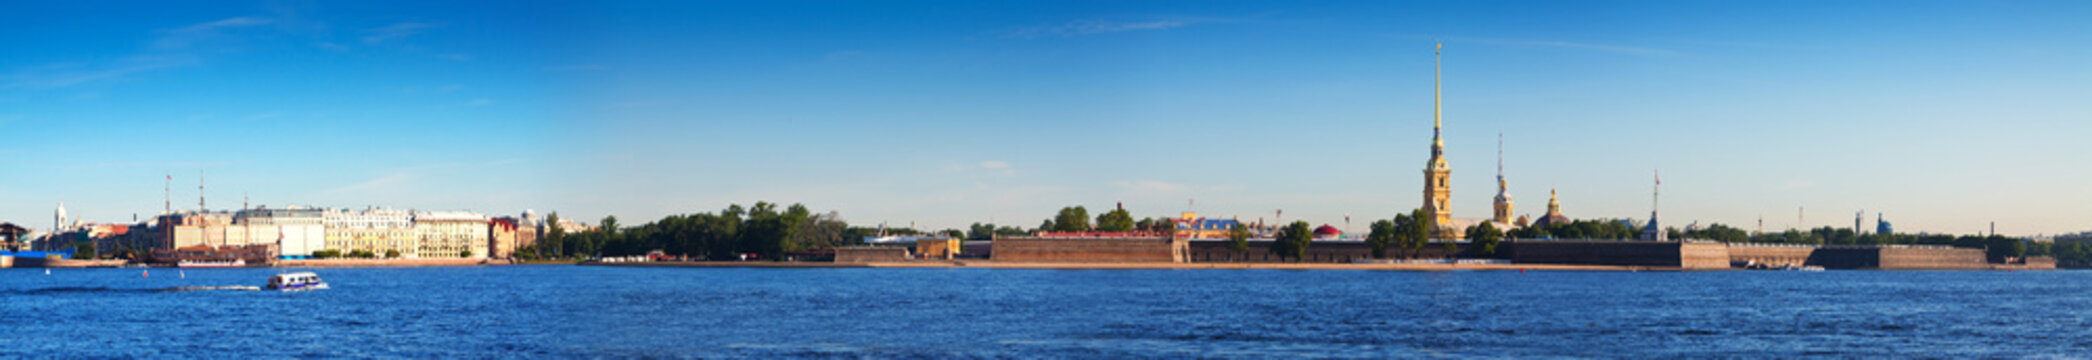 View of St. Petersburg. Peter and Paul Fortress